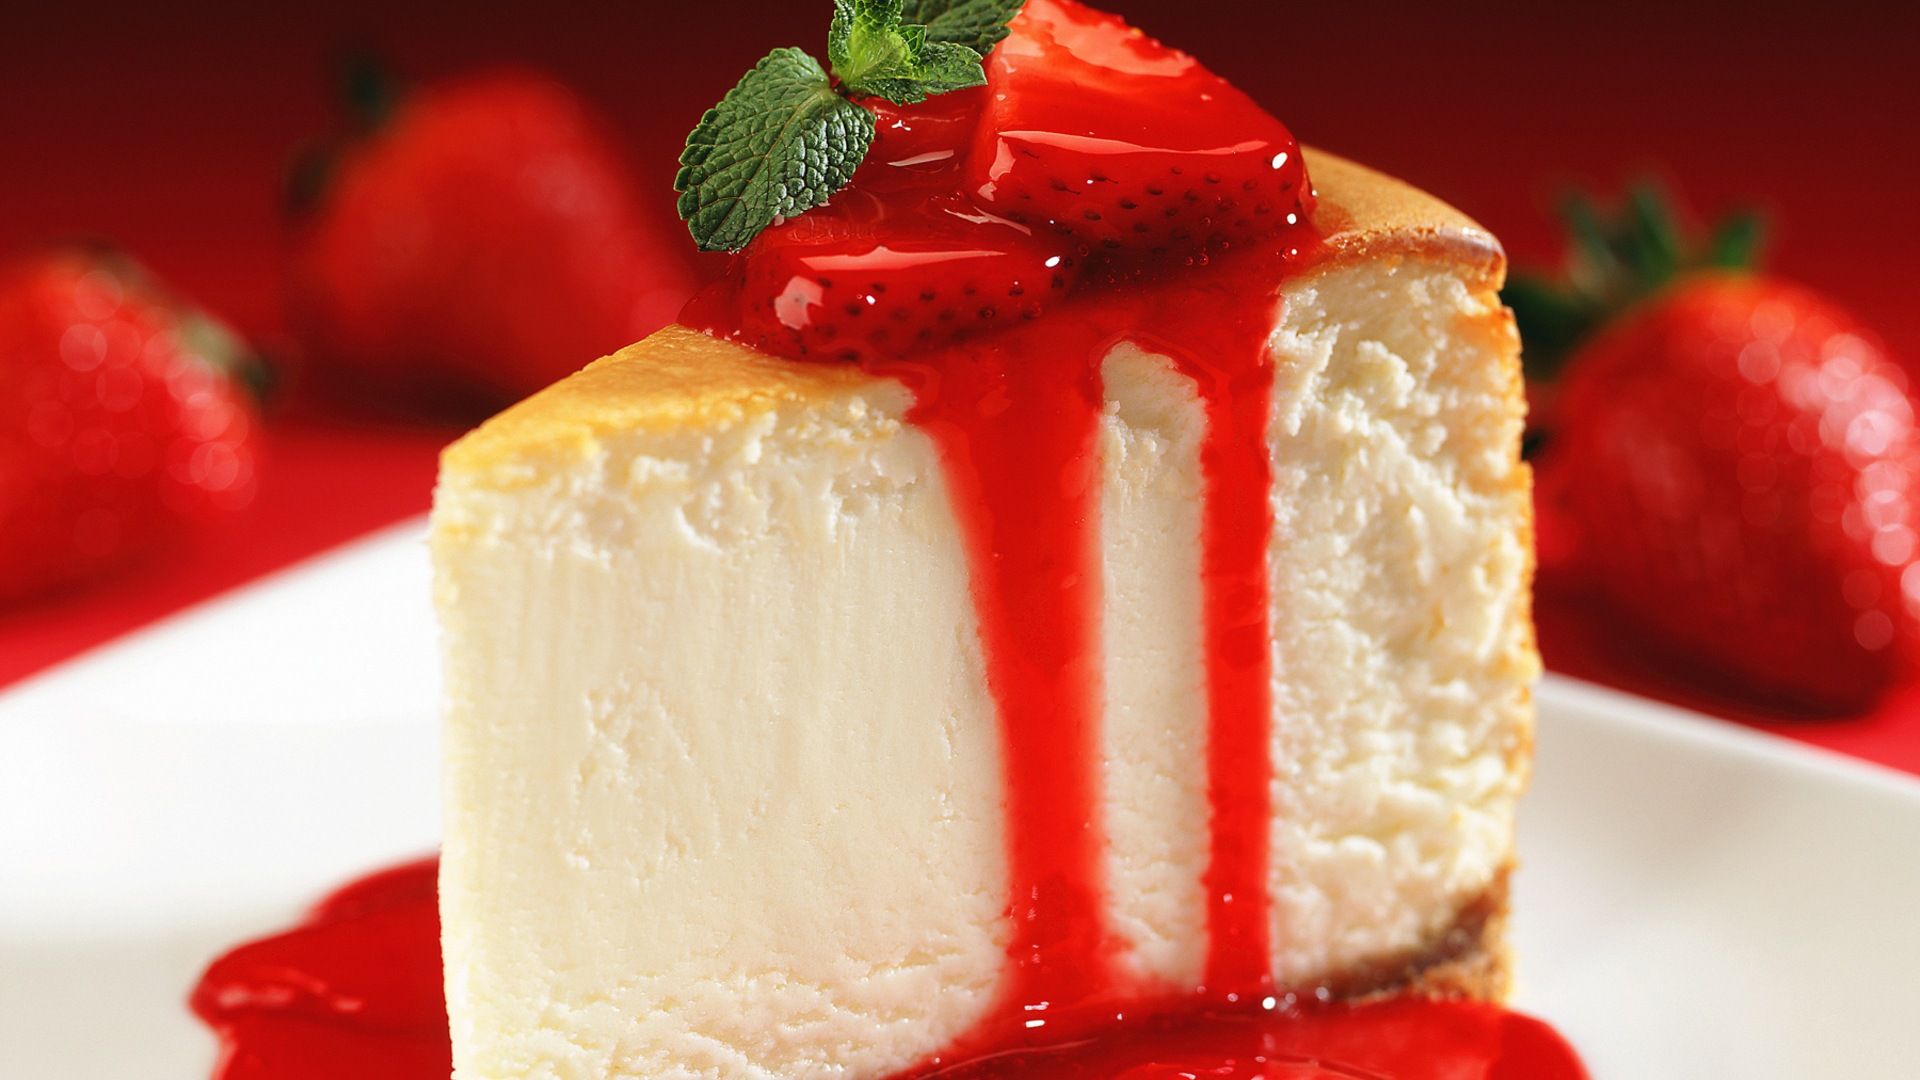 Delicious strawberry cake HD wallpapers #8 - 1920x1080